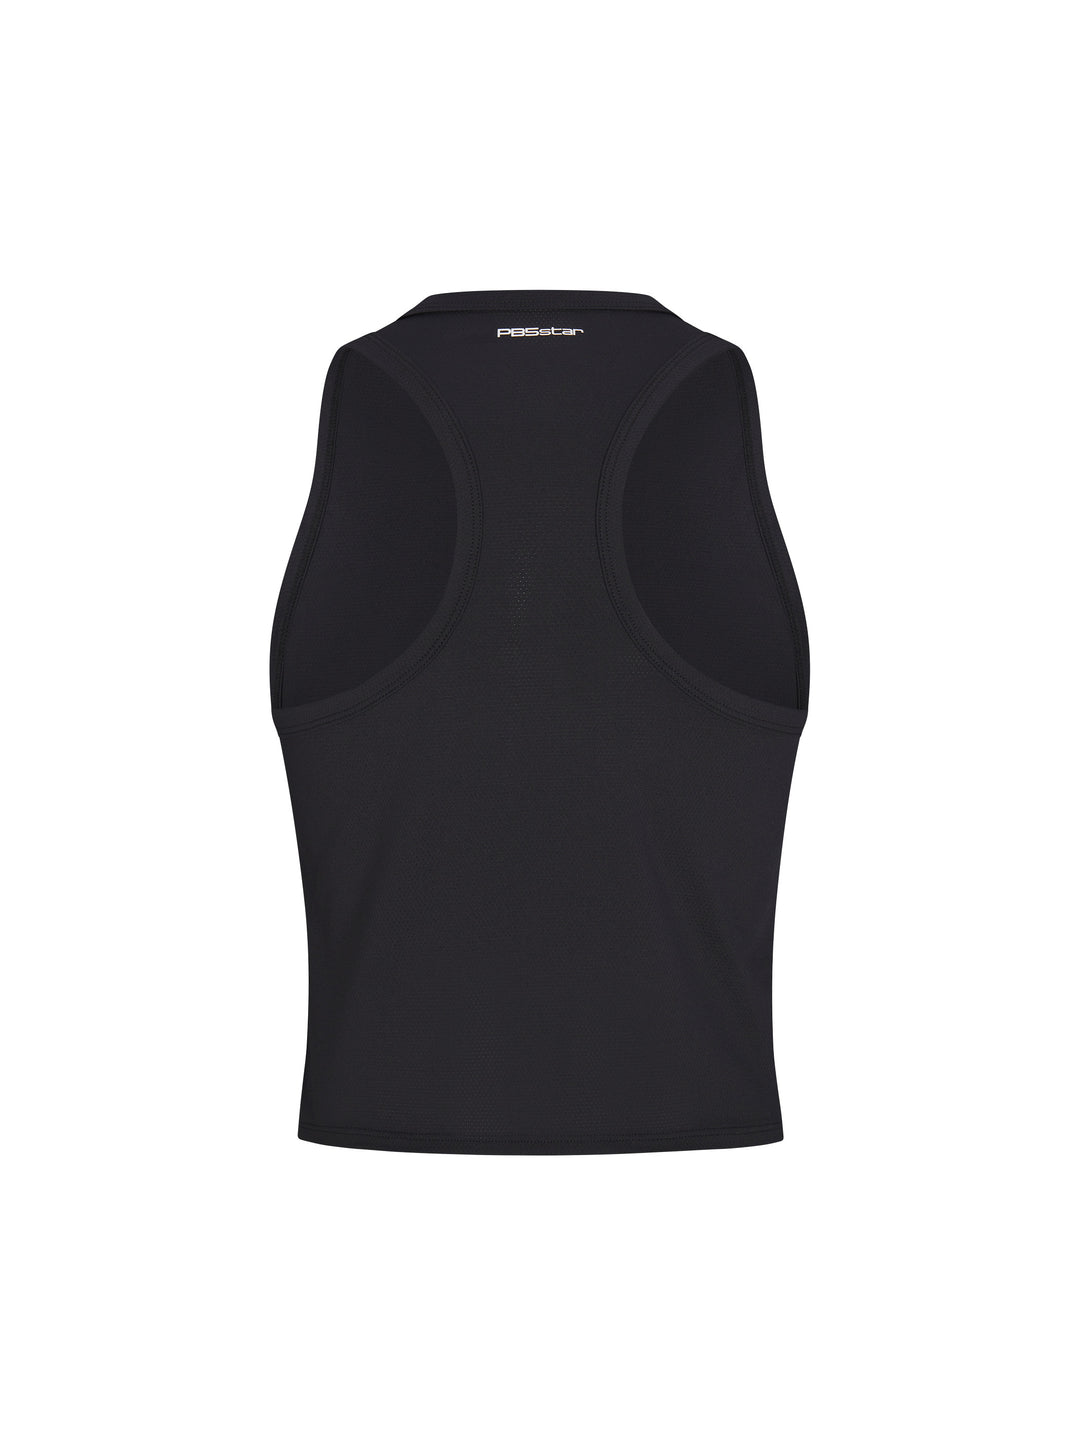 Women's Cropped Racer Back Tank back view in black. Small logo centered under neck seam.